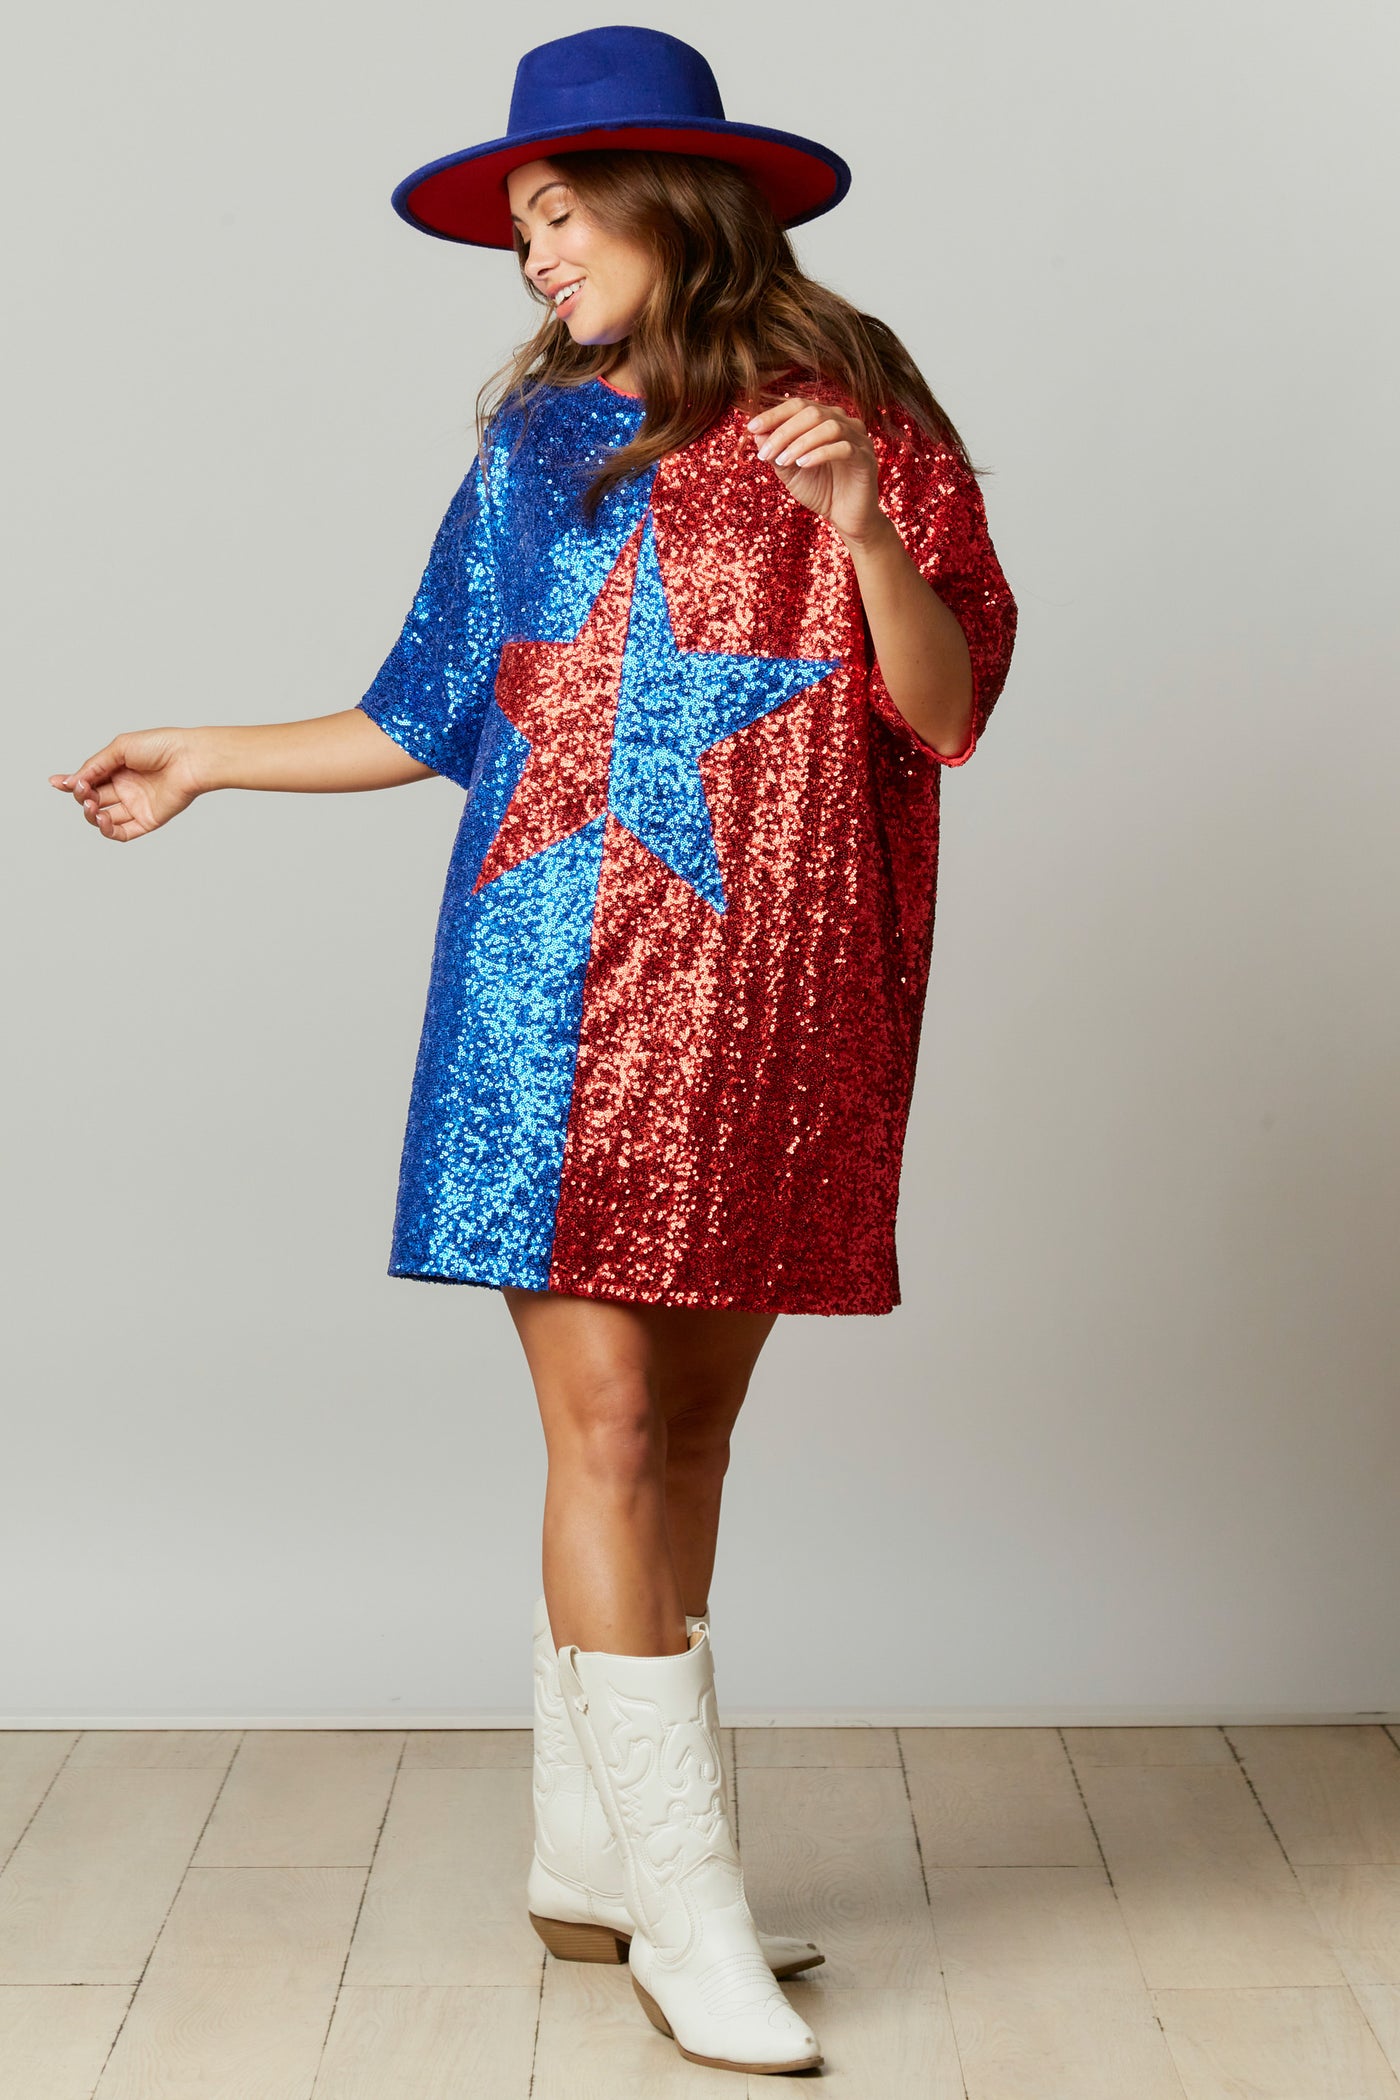 Big Reputation Color Block Sequin Star Dress in Red/Blue